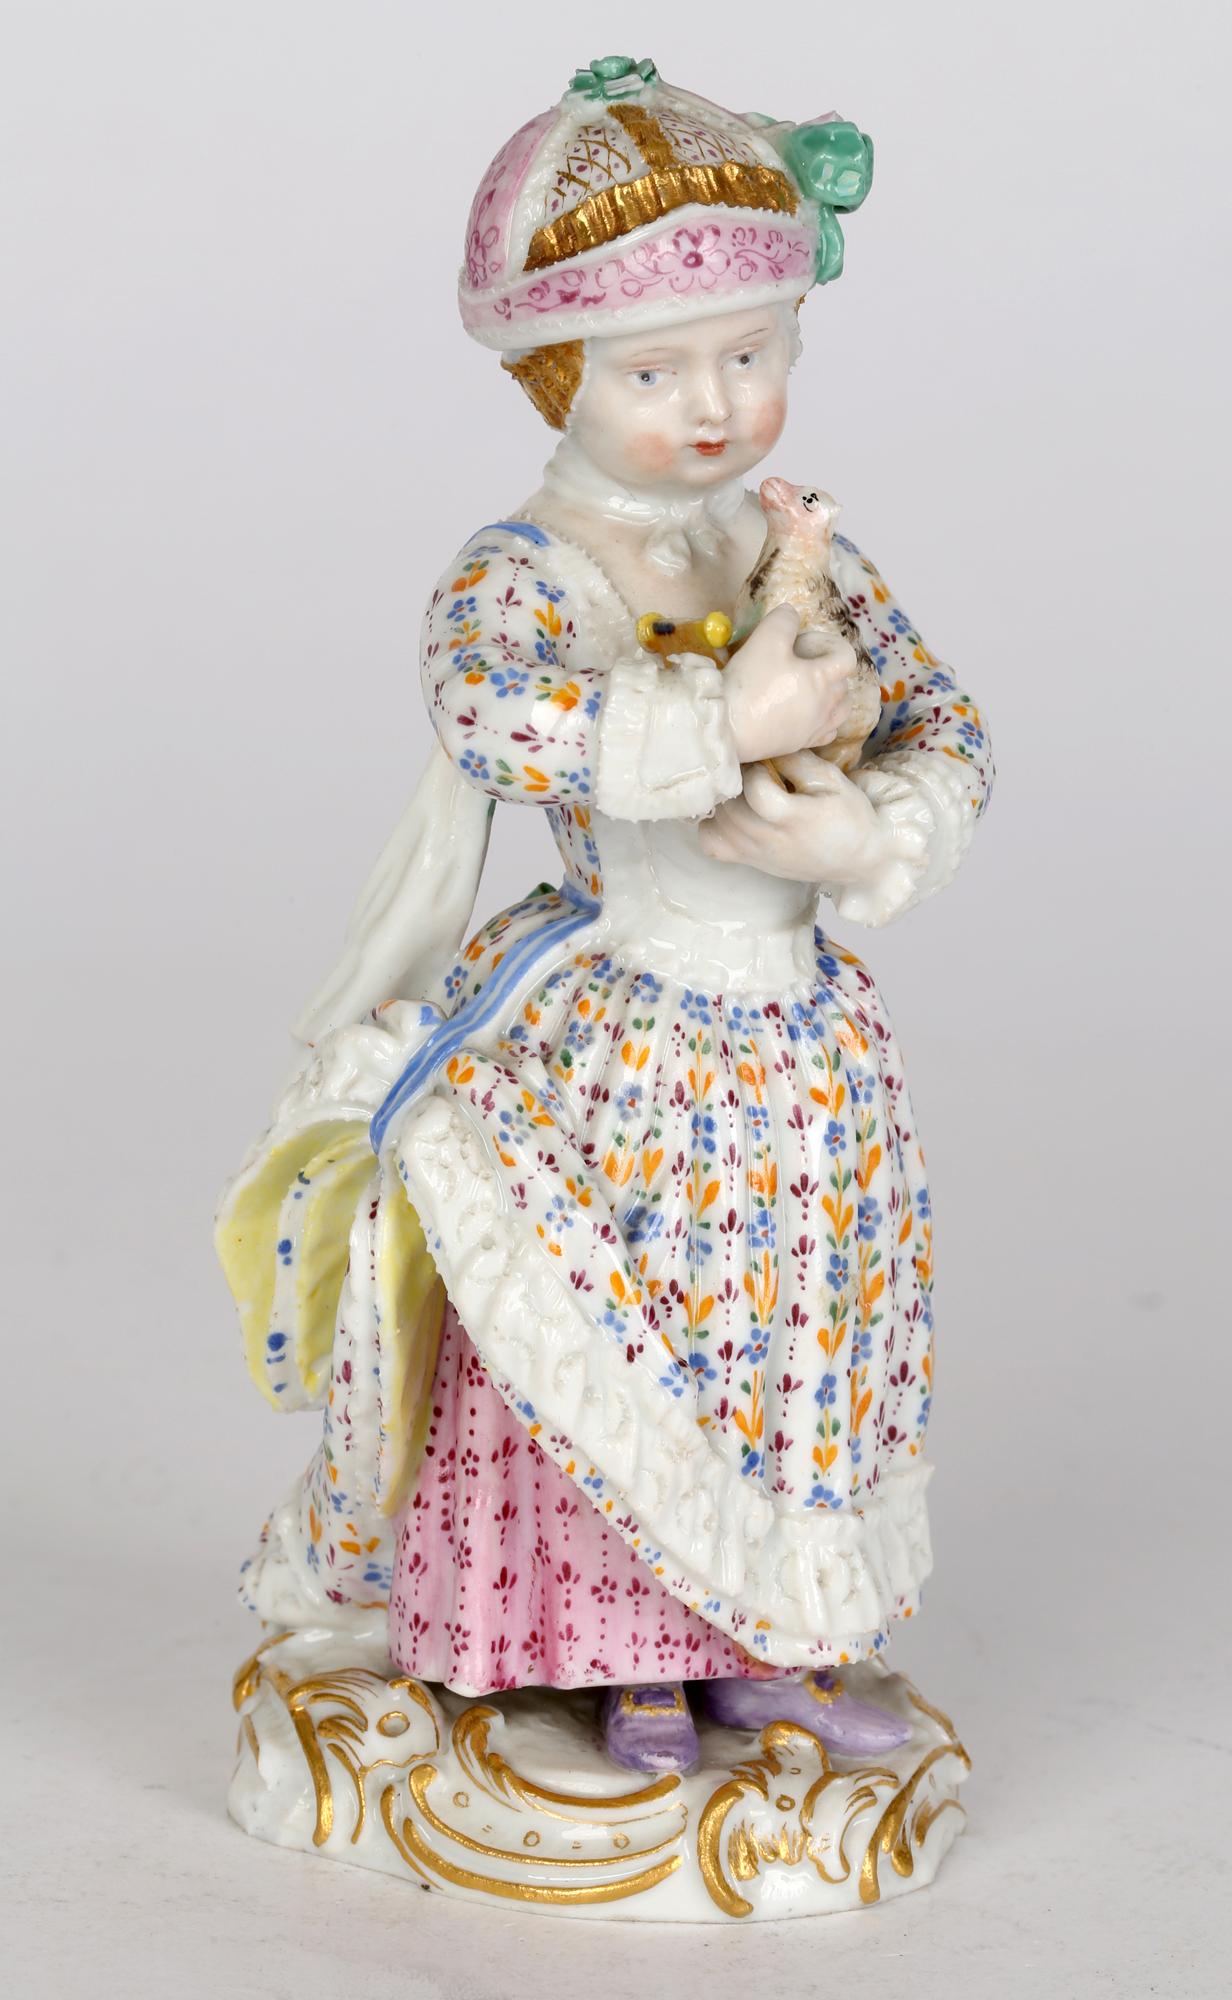 Meissen Porcelain Figurine of a Young Girl Holding a Pull Along Animal Toy 1